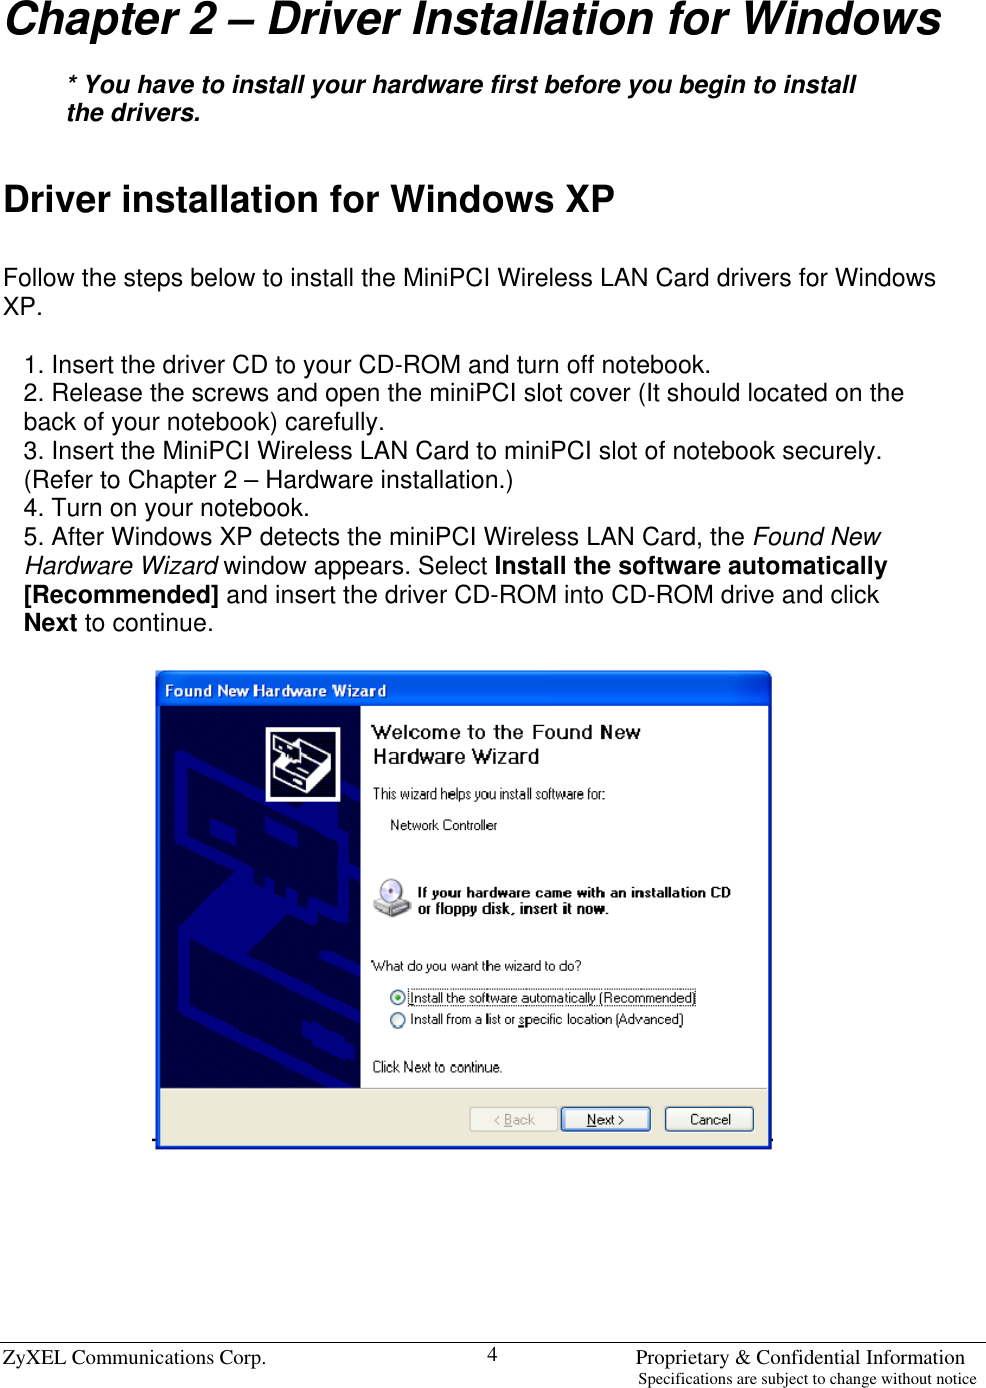  ZyXEL Communications Corp.                                                                       Proprietary &amp; Confidential Information                                                                                                                           Specifications are subject to change without notice 4 Chapter 2 – Driver Installation for Windows  * You have to install your hardware first before you begin to install the drivers.   Driver installation for Windows XP  Follow the steps below to install the MiniPCI Wireless LAN Card drivers for Windows XP.  1. Insert the driver CD to your CD-ROM and turn off notebook. 2. Release the screws and open the miniPCI slot cover (It should located on the back of your notebook) carefully. 3. Insert the MiniPCI Wireless LAN Card to miniPCI slot of notebook securely. (Refer to Chapter 2 – Hardware installation.) 4. Turn on your notebook. 5. After Windows XP detects the miniPCI Wireless LAN Card, the Found New Hardware Wizard window appears. Select Install the software automatically [Recommended] and insert the driver CD-ROM into CD-ROM drive and click Next to continue.        